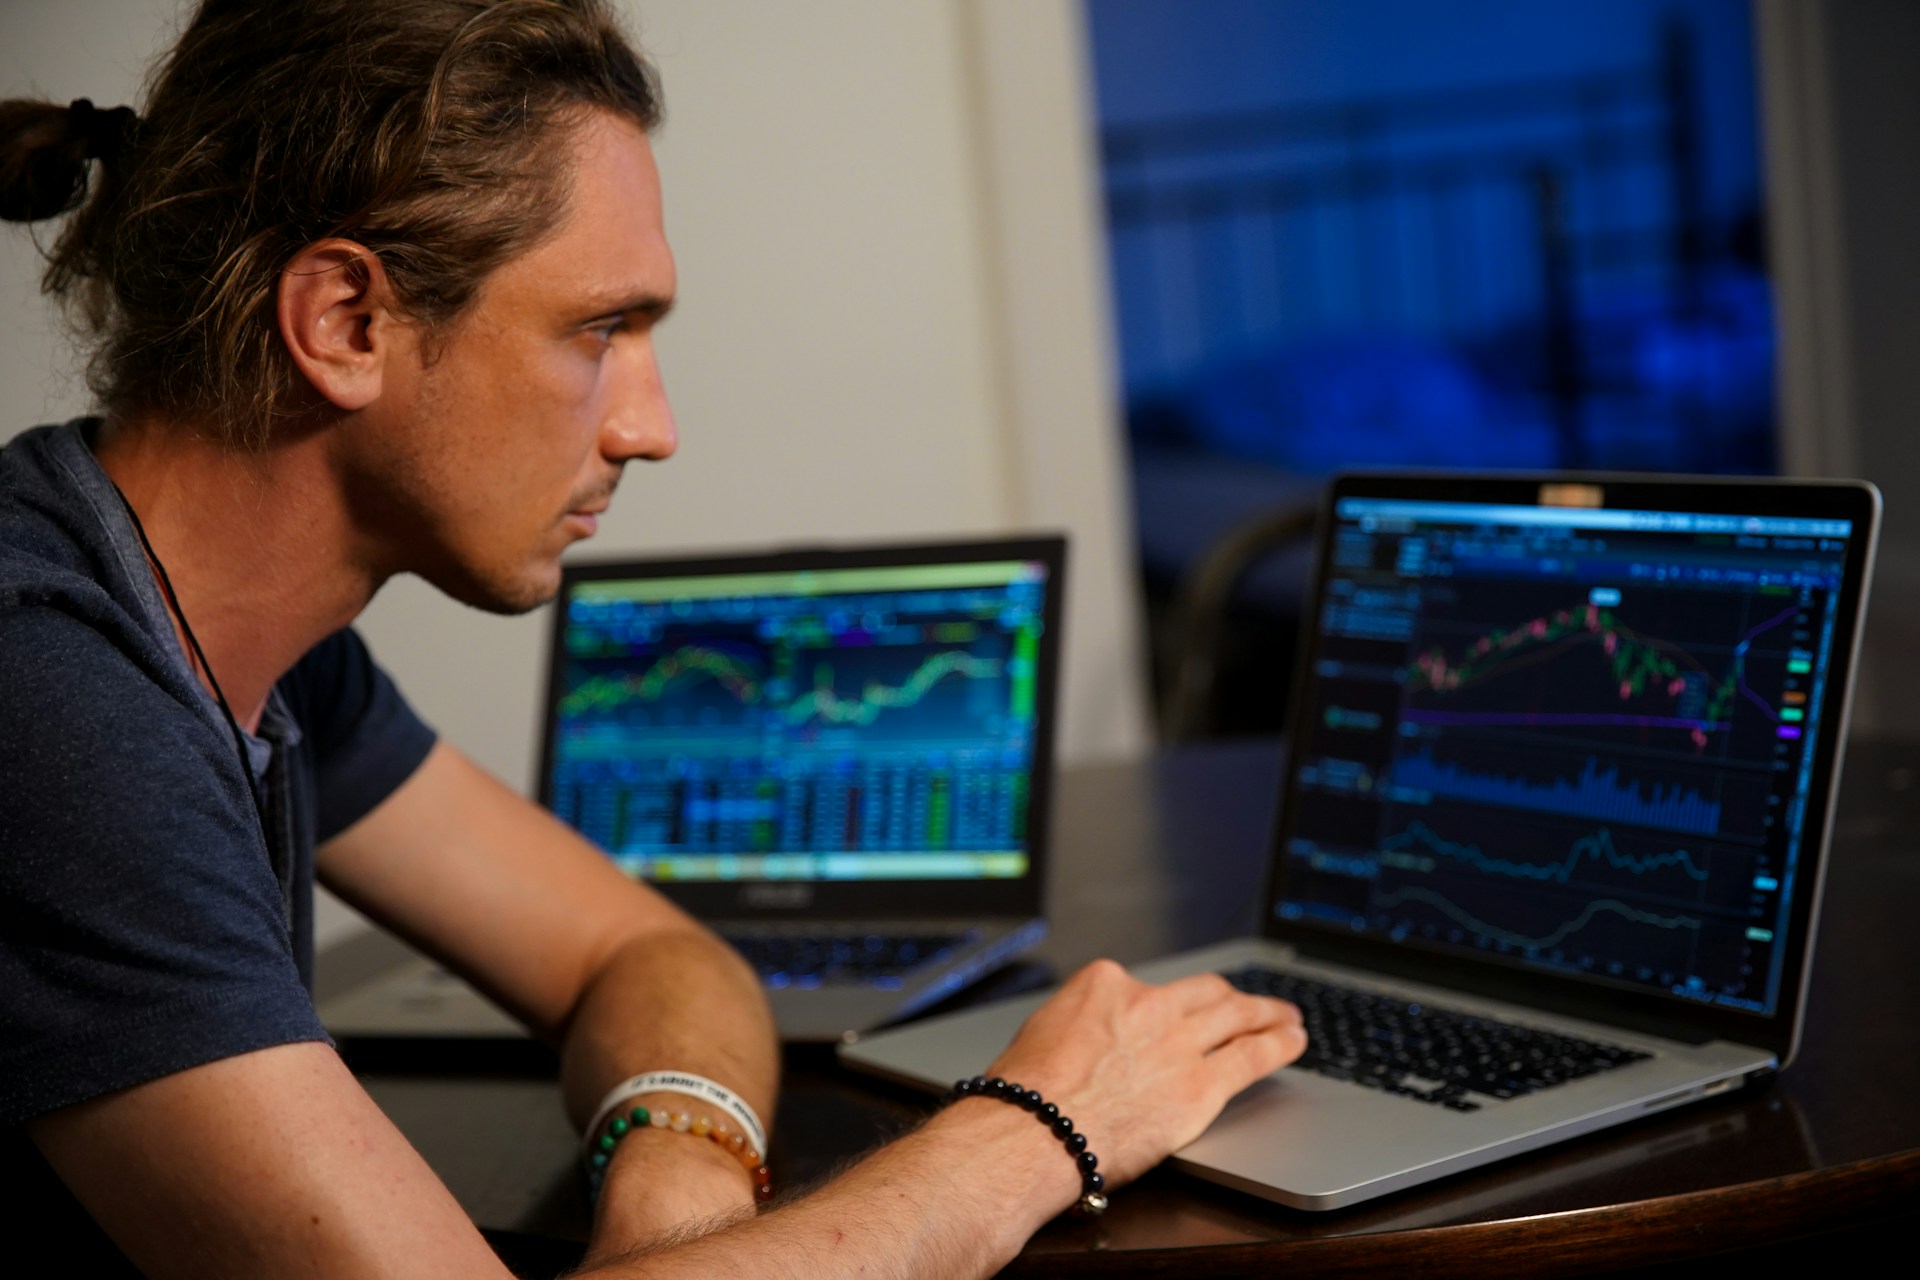 do day trading rules apply to cryptocurrency